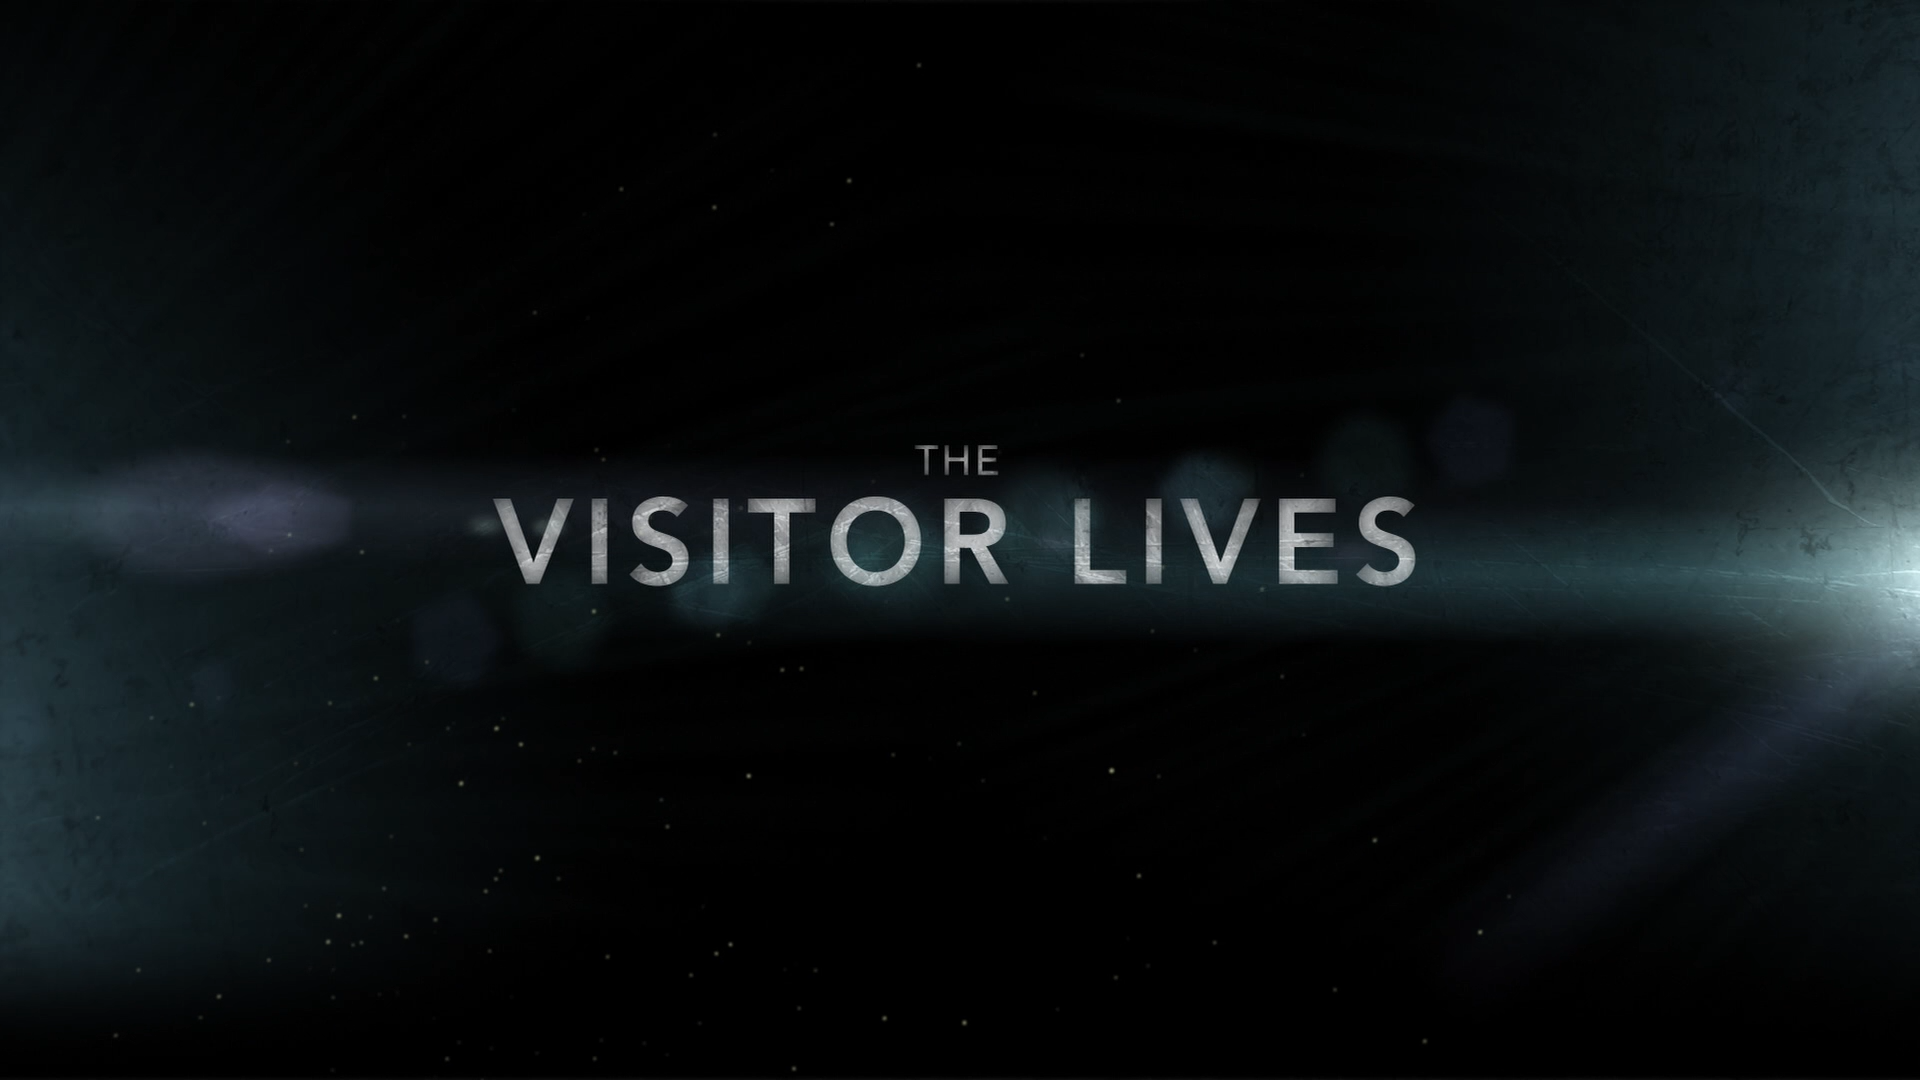 The Visitor Lives